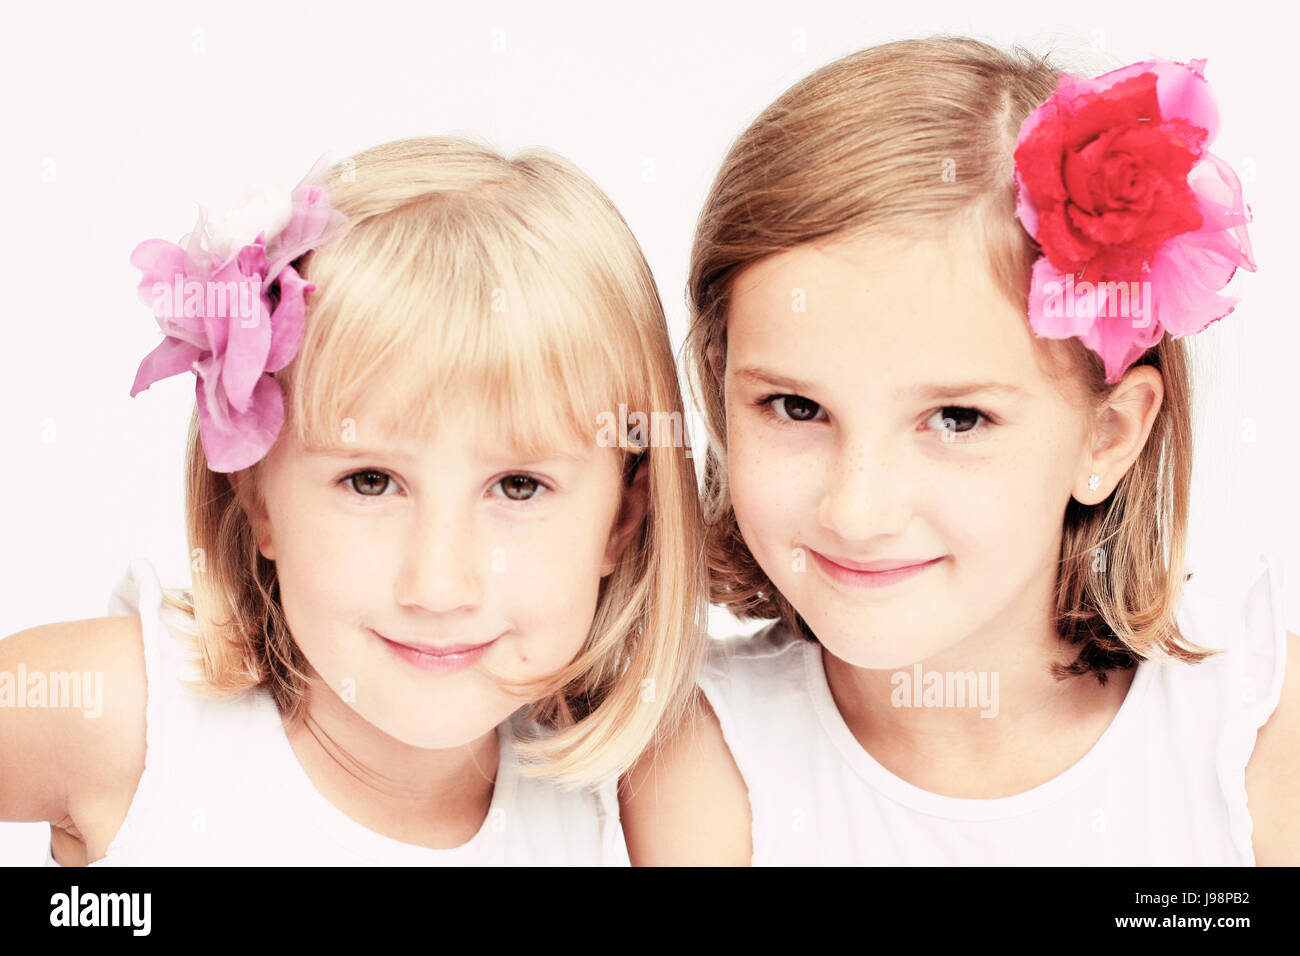 Children Sitting Two Girls With Bobs Bob Hairstyles And Flowers